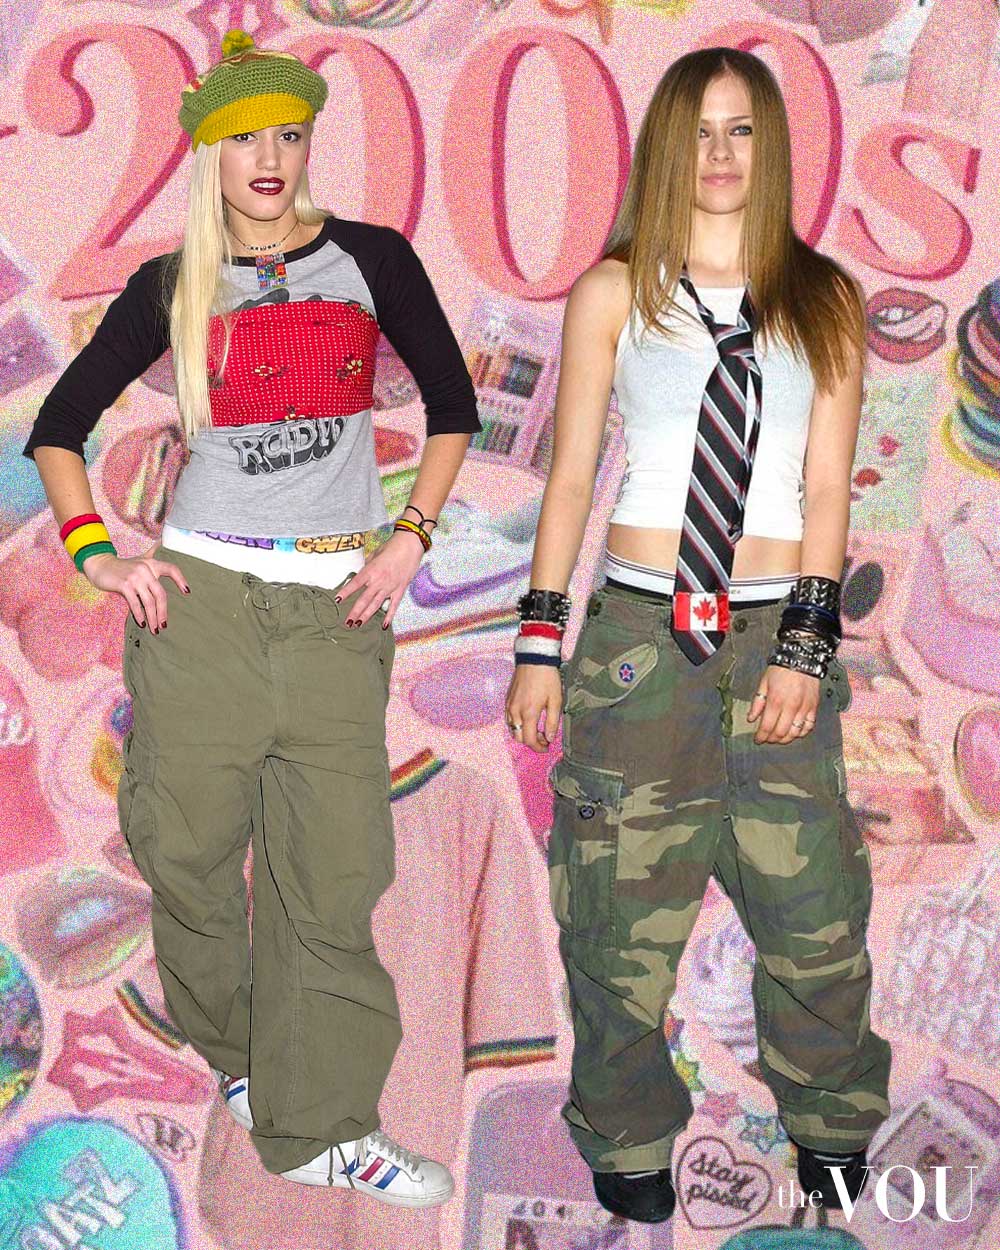 Gwen Stefani and Avril Lavigne wearing cargo pants in the 2000s fashion